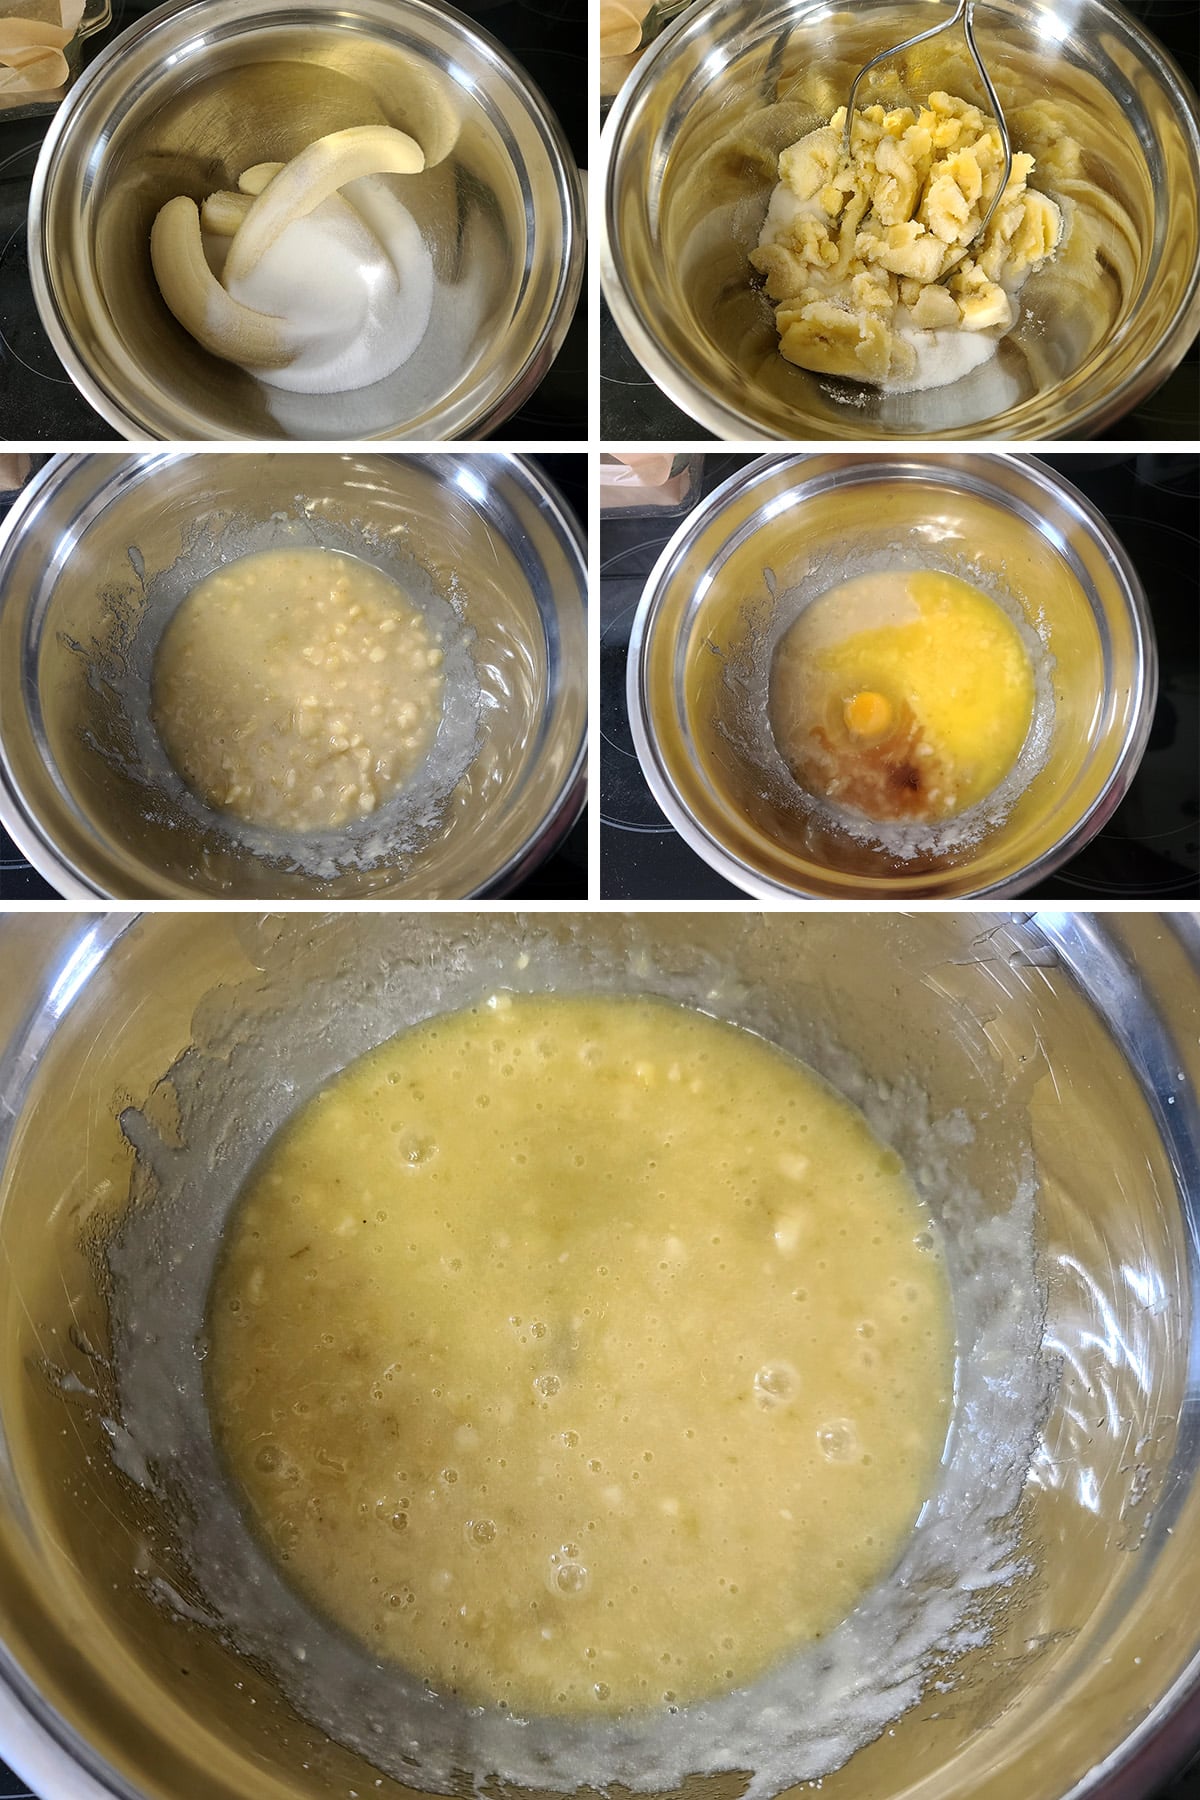 A 5 part image showing the banana being mashed with the sugar, then mixed with the remaining wet ingredients.